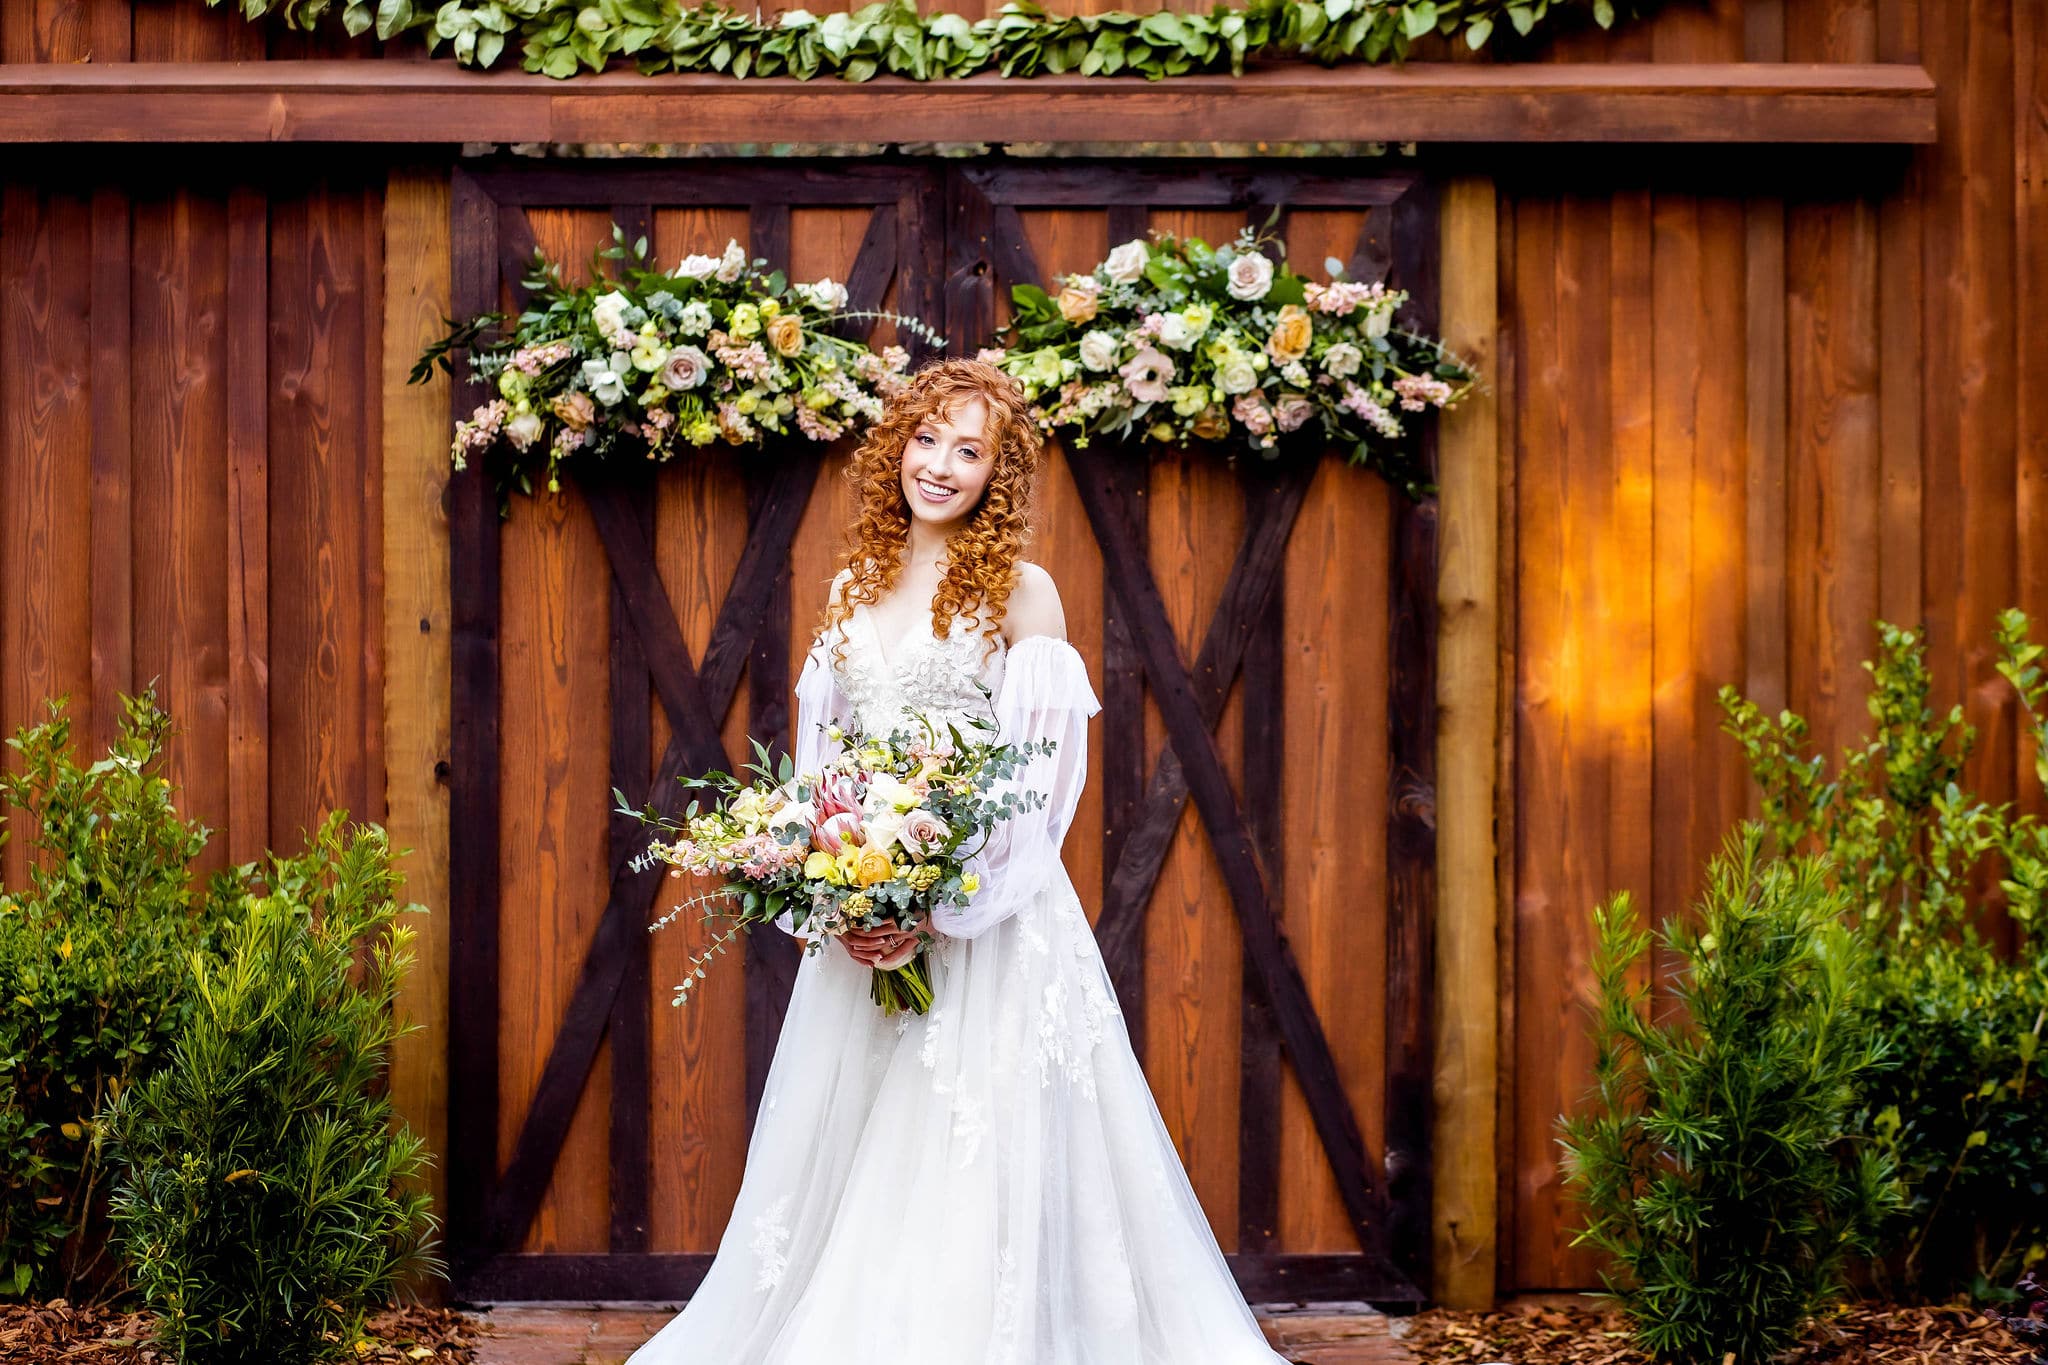 woman in bridal gown holding bouquet stands in front of closed barn doors with greenery in front of them off to the sides and two floral arrangements hanging from the top of them